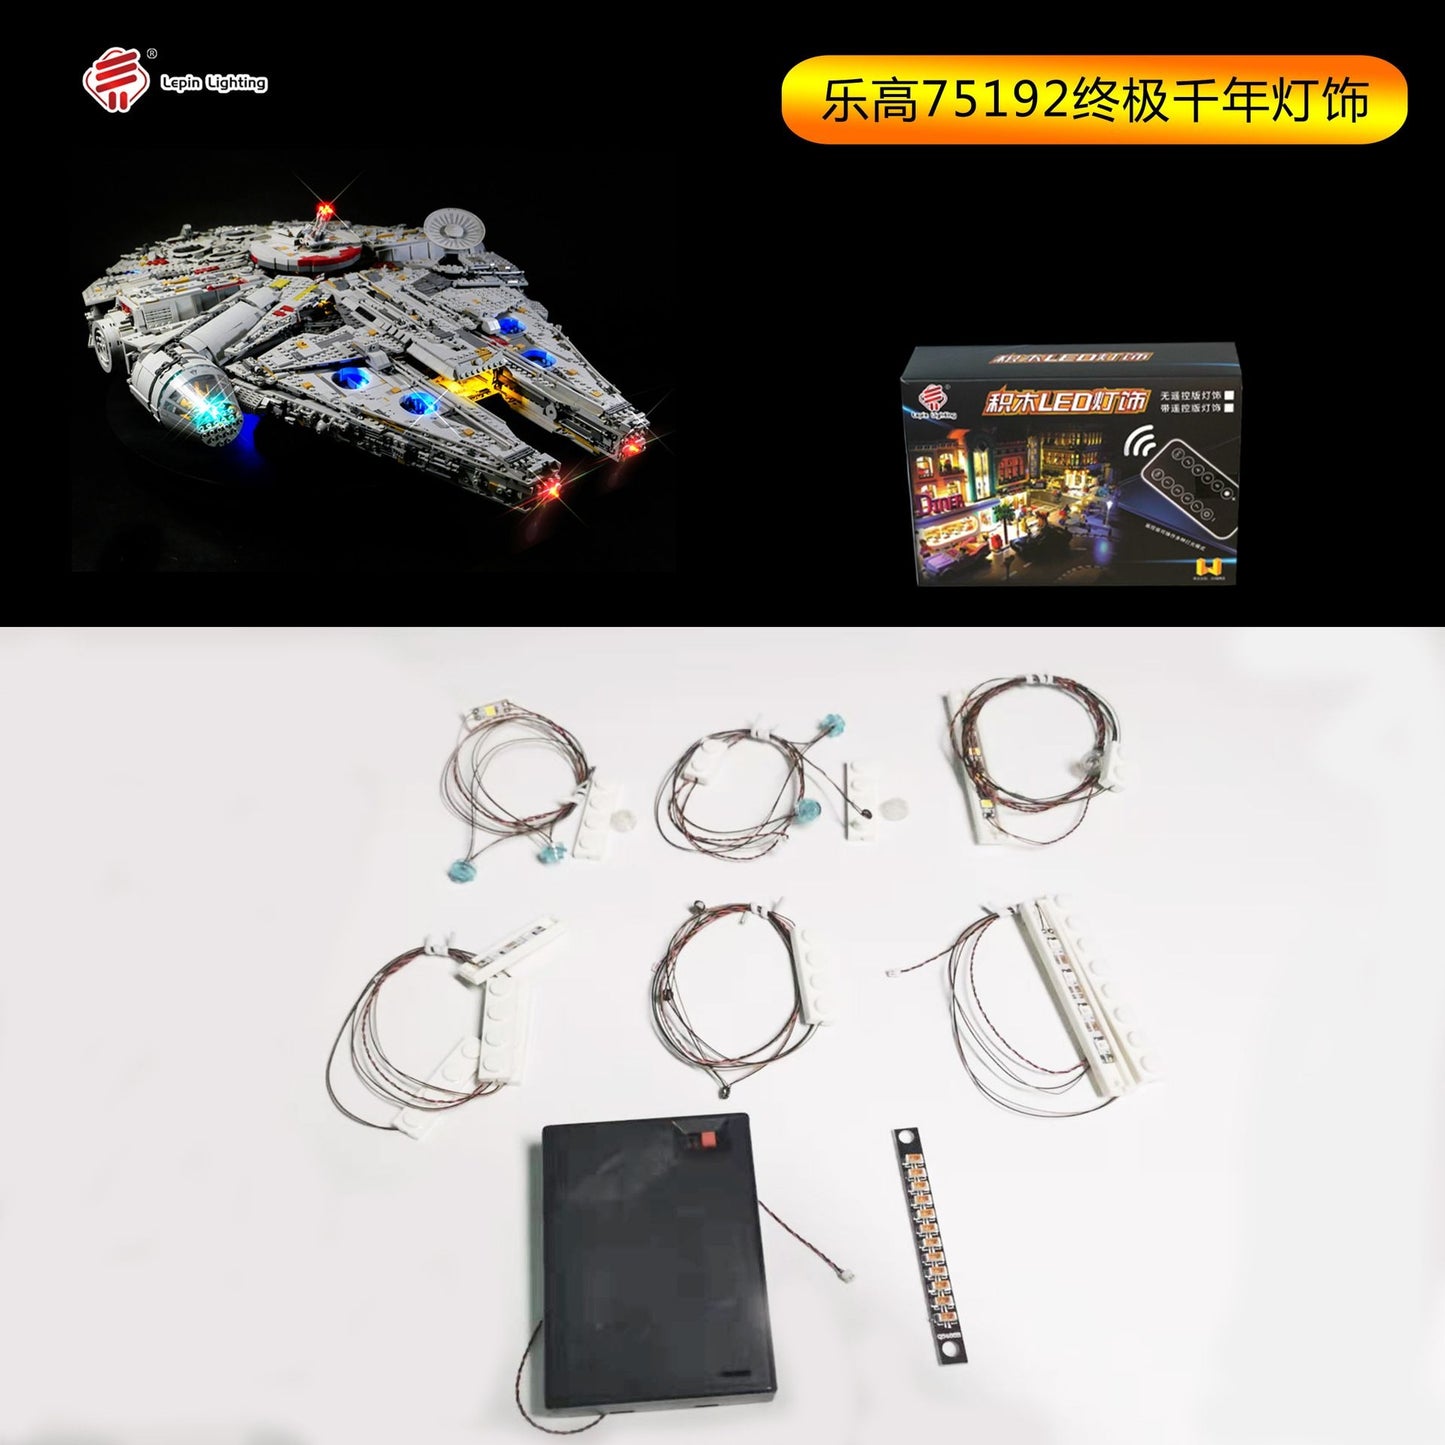 Millennium Falcon Light Kit, Compatible with Lego and other brands